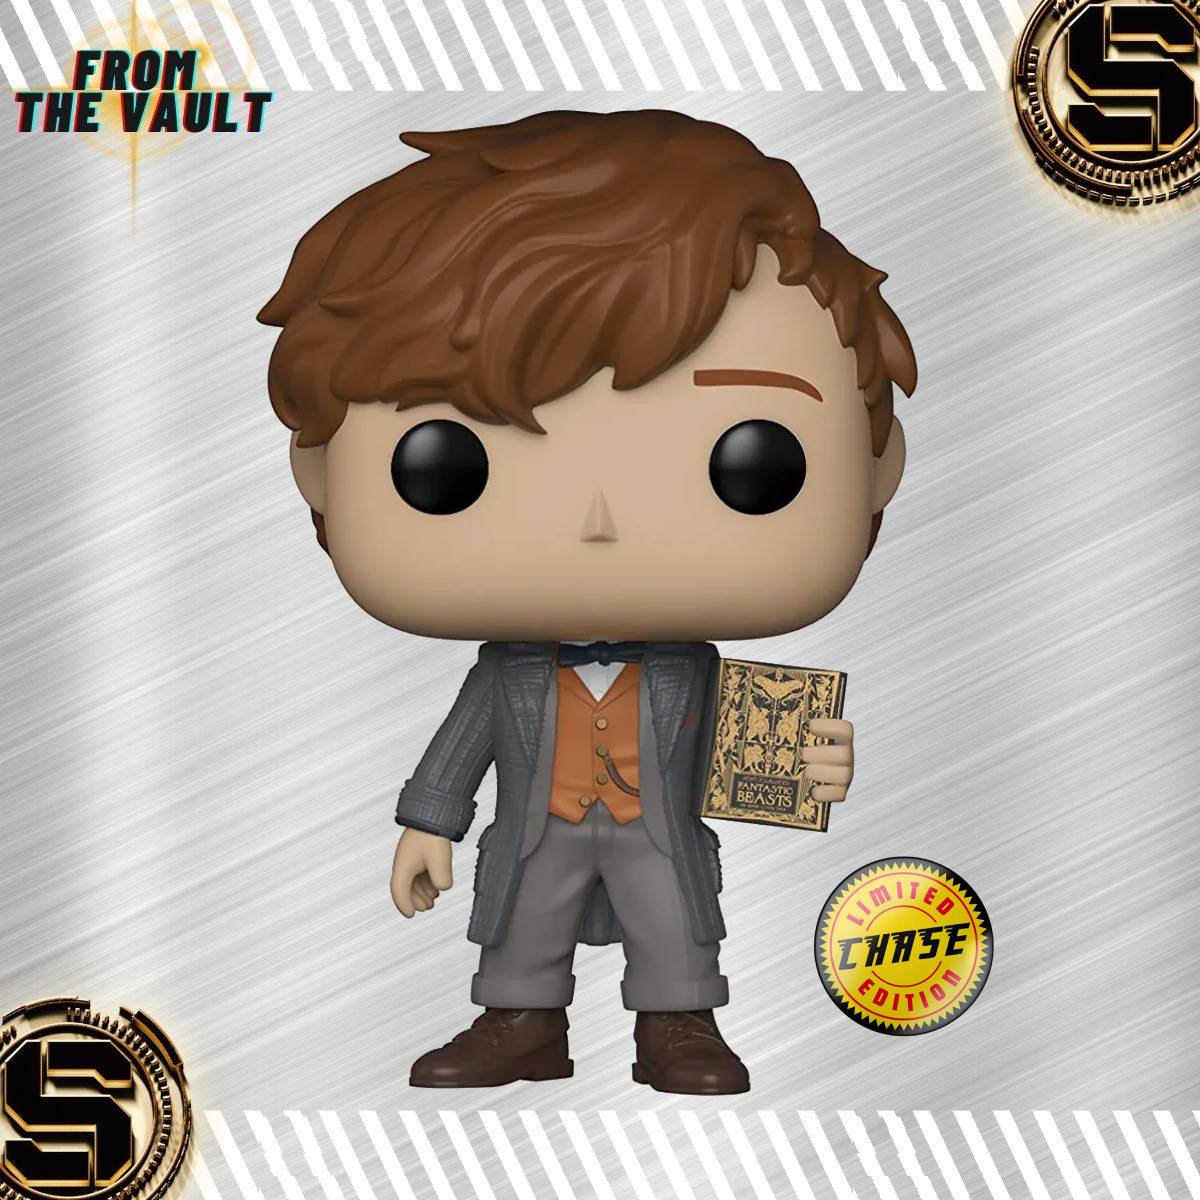 FUNKO POP MOVIES FANTASTIC BEAST CRIMES OF GRINDELWALD NEWT SCAMANDER 14 CHASE